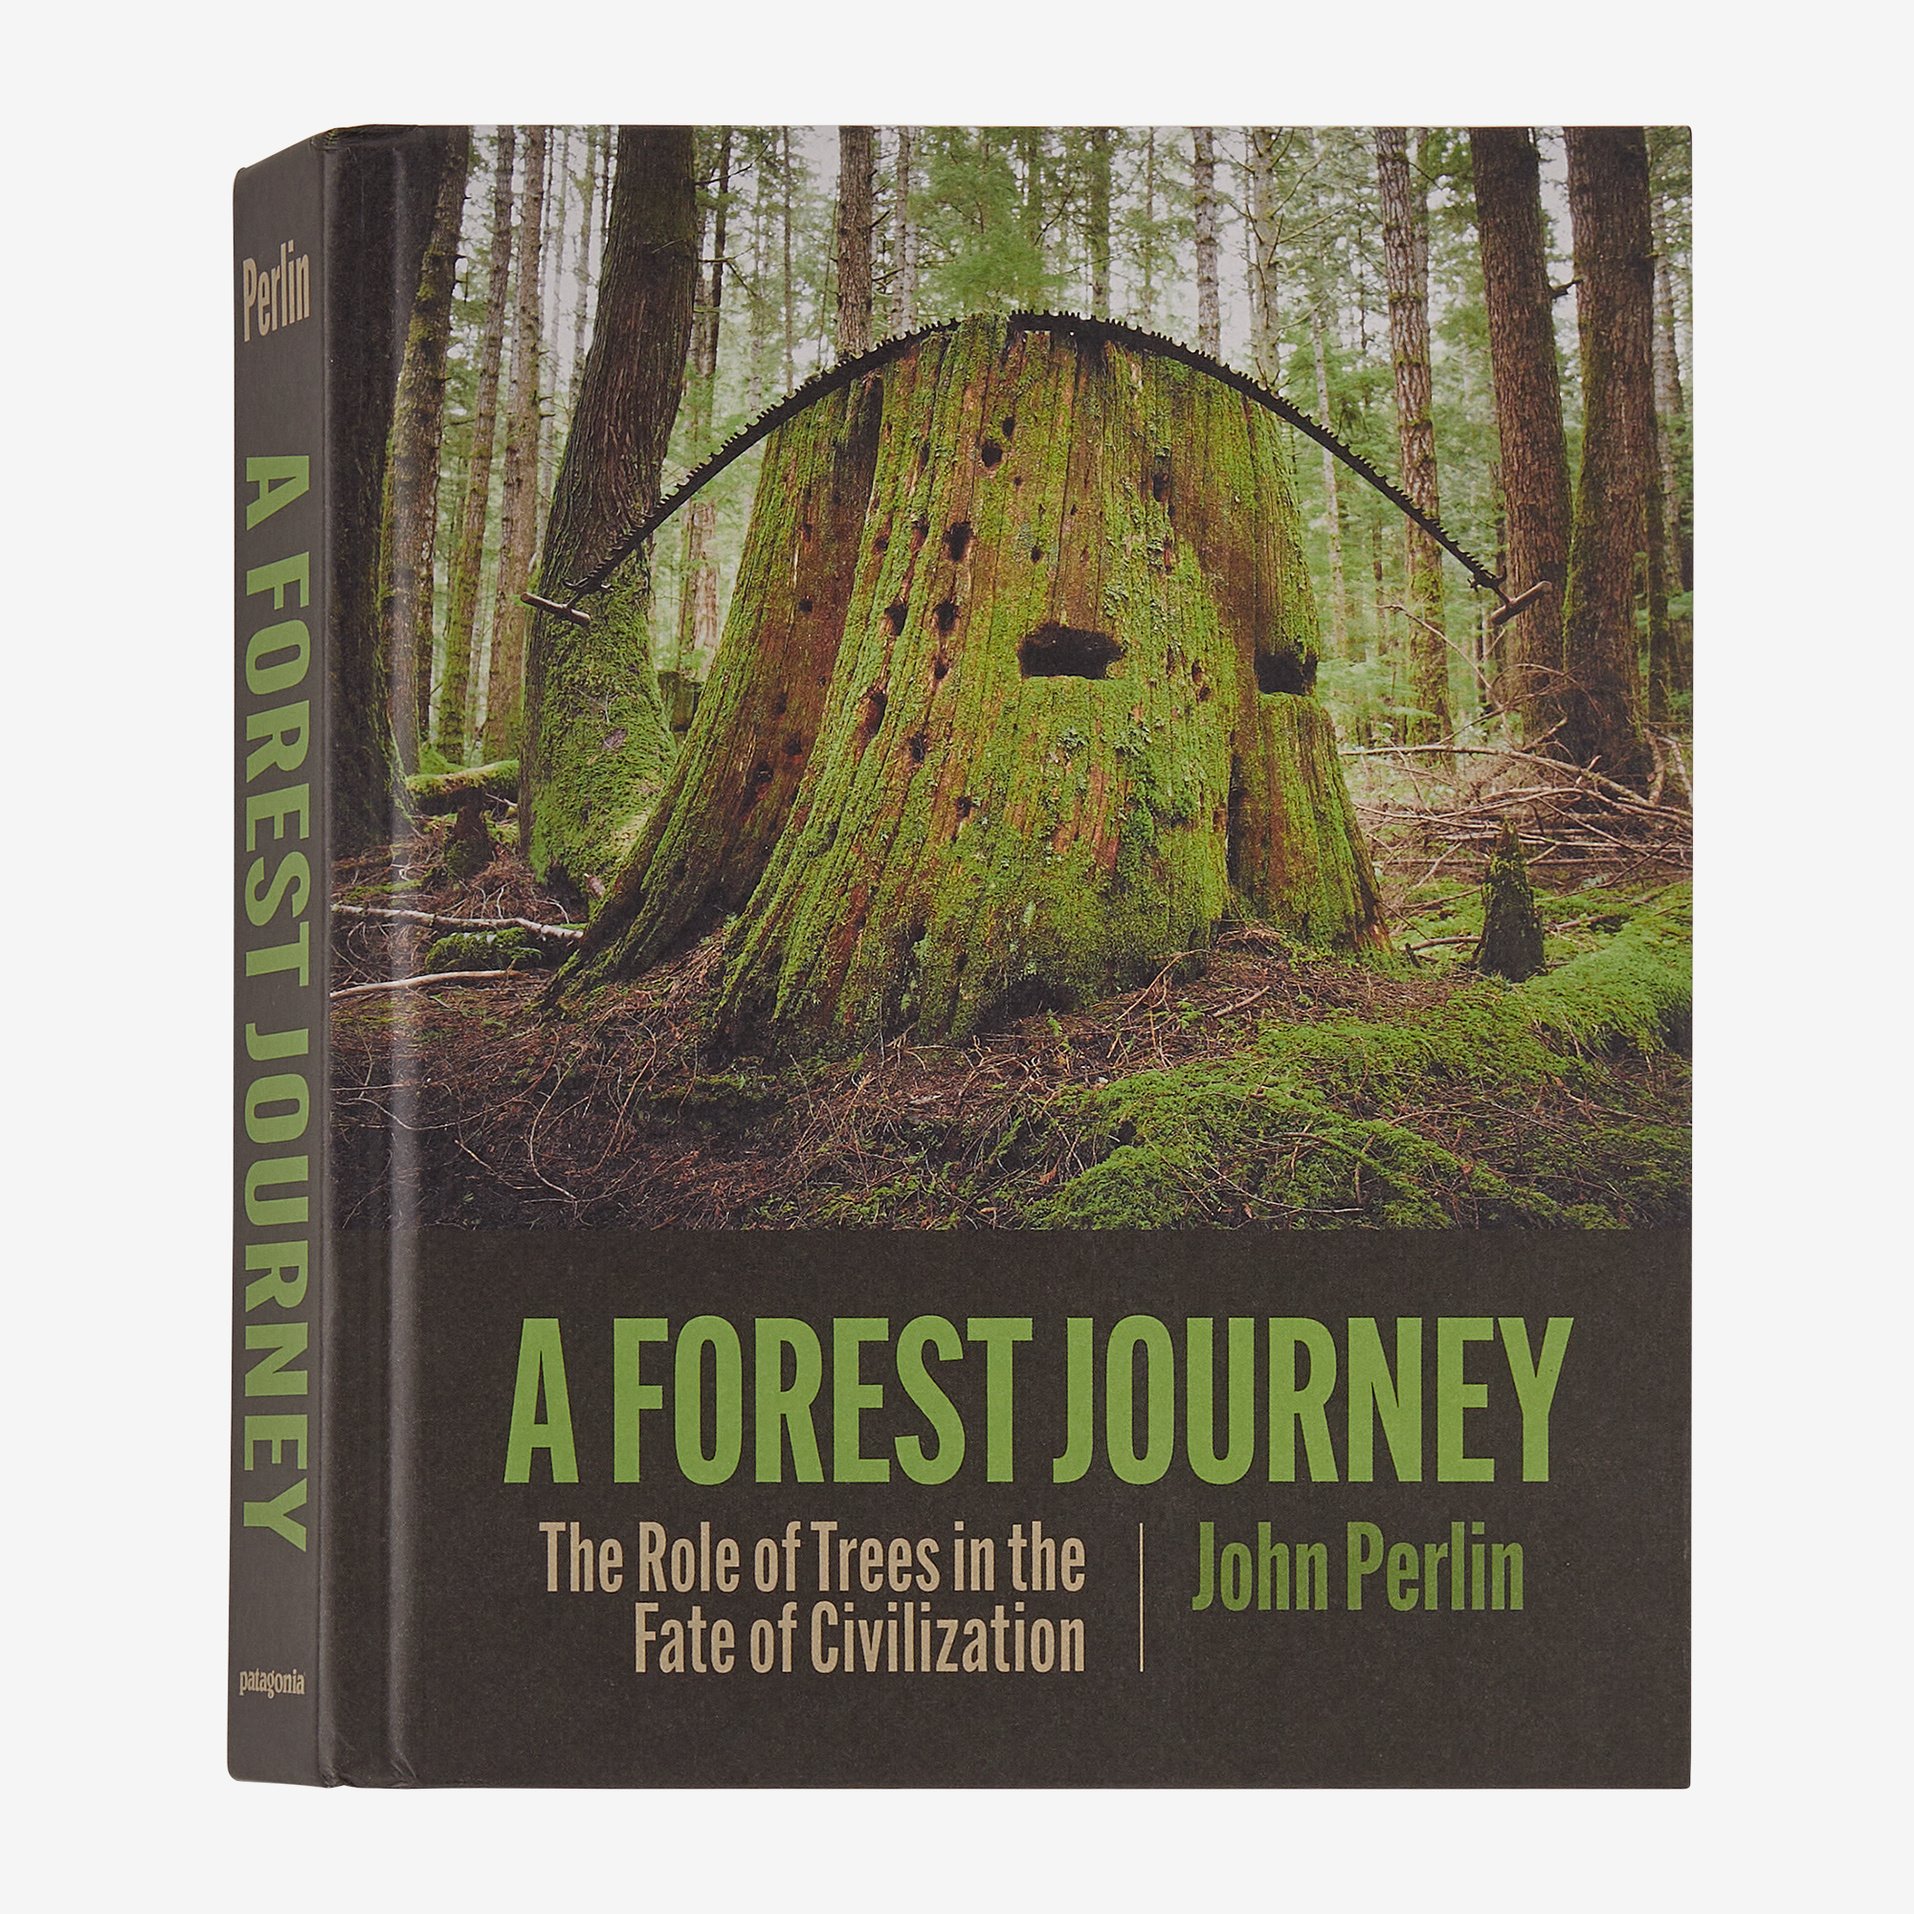 Lancetooth Crosscut Saw covers A Forest Journey by John Perlin from Patagonia Books